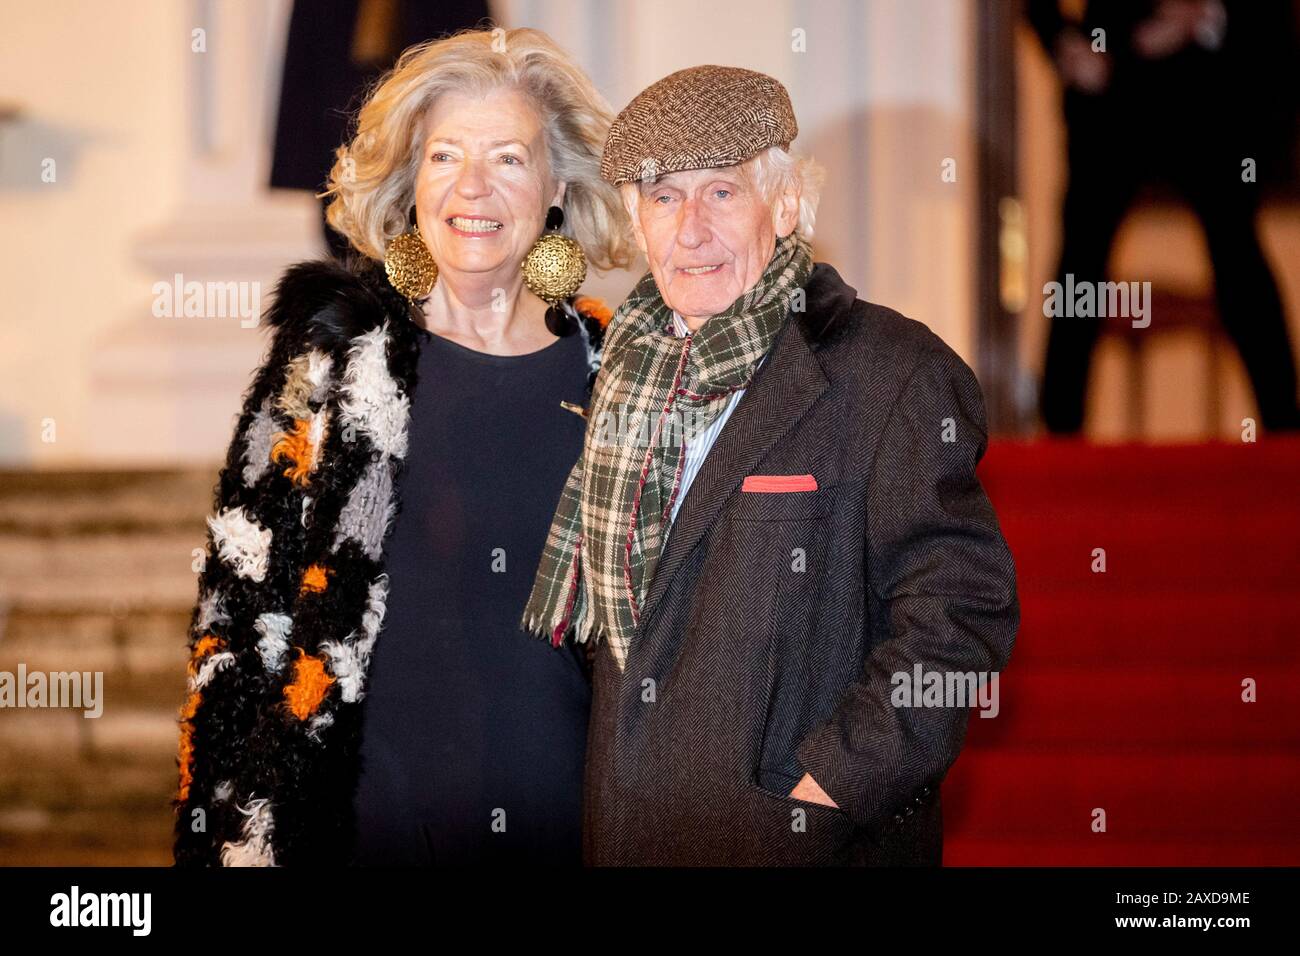 Berlin, Germany. 11th Feb, 2020. Peter Raue, lawyer and patron of the arts, is coming to Bellevue Palace with his wife Andrea Countess Bernstorff for a dinner in honour of former Federal President Gauck and on the occasion of his 80th birthday. Credit: Christoph Soeder/dpa/Alamy Live News Stock Photo